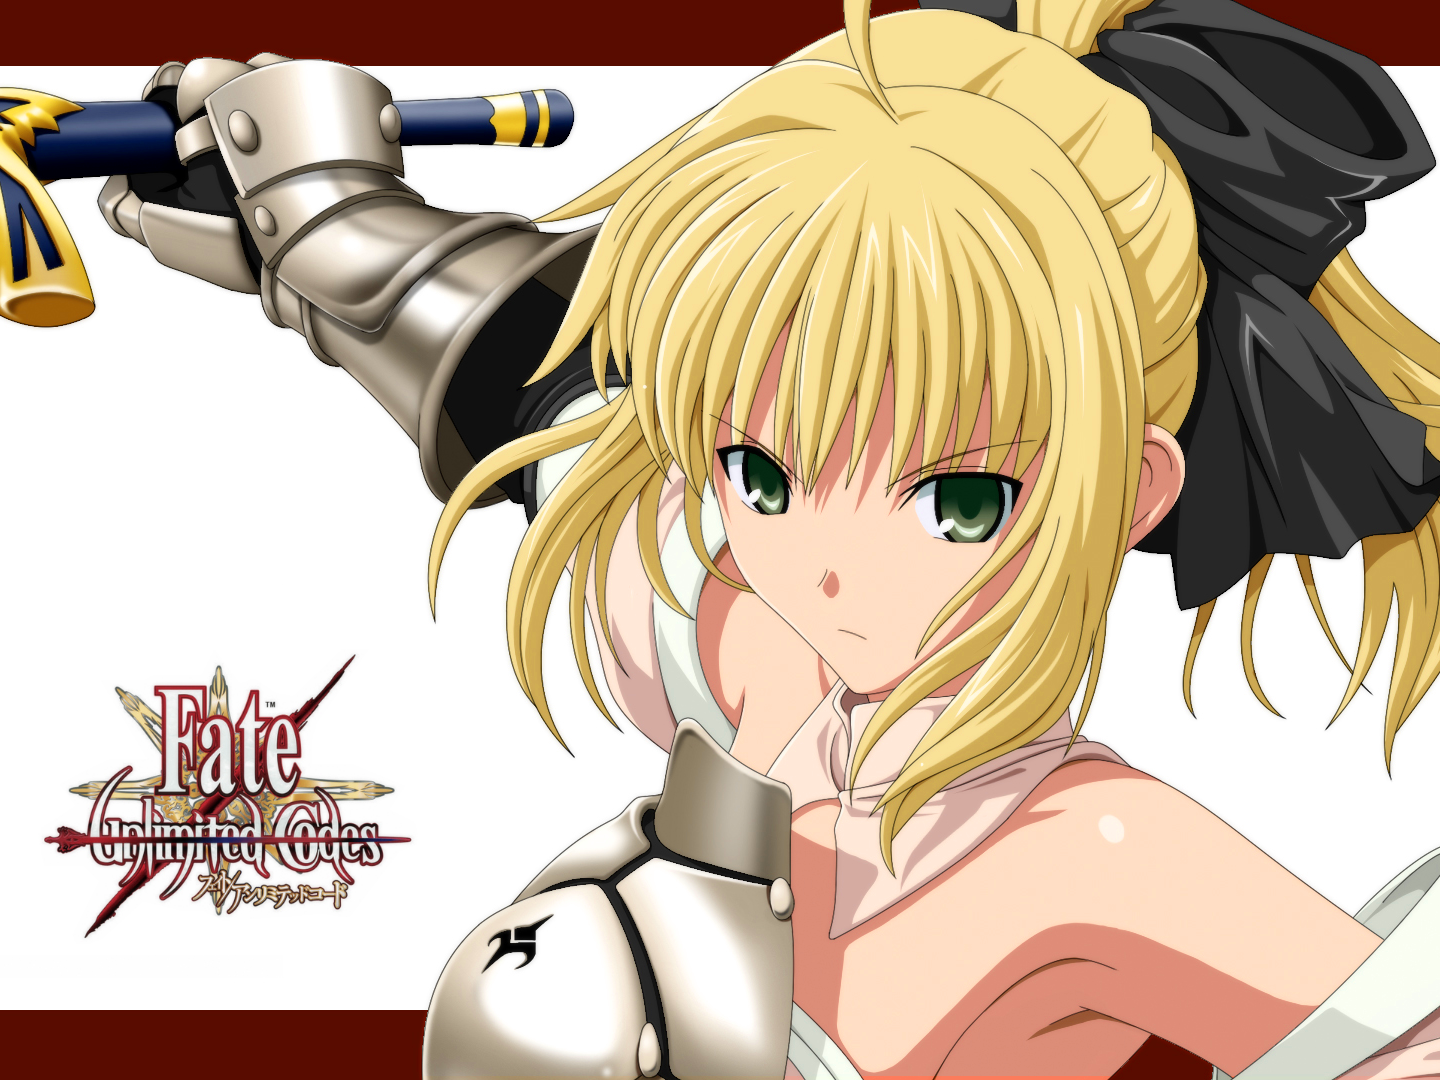 Saber Lily from Fate/unlimited codes anime wearing a beautiful outfit.